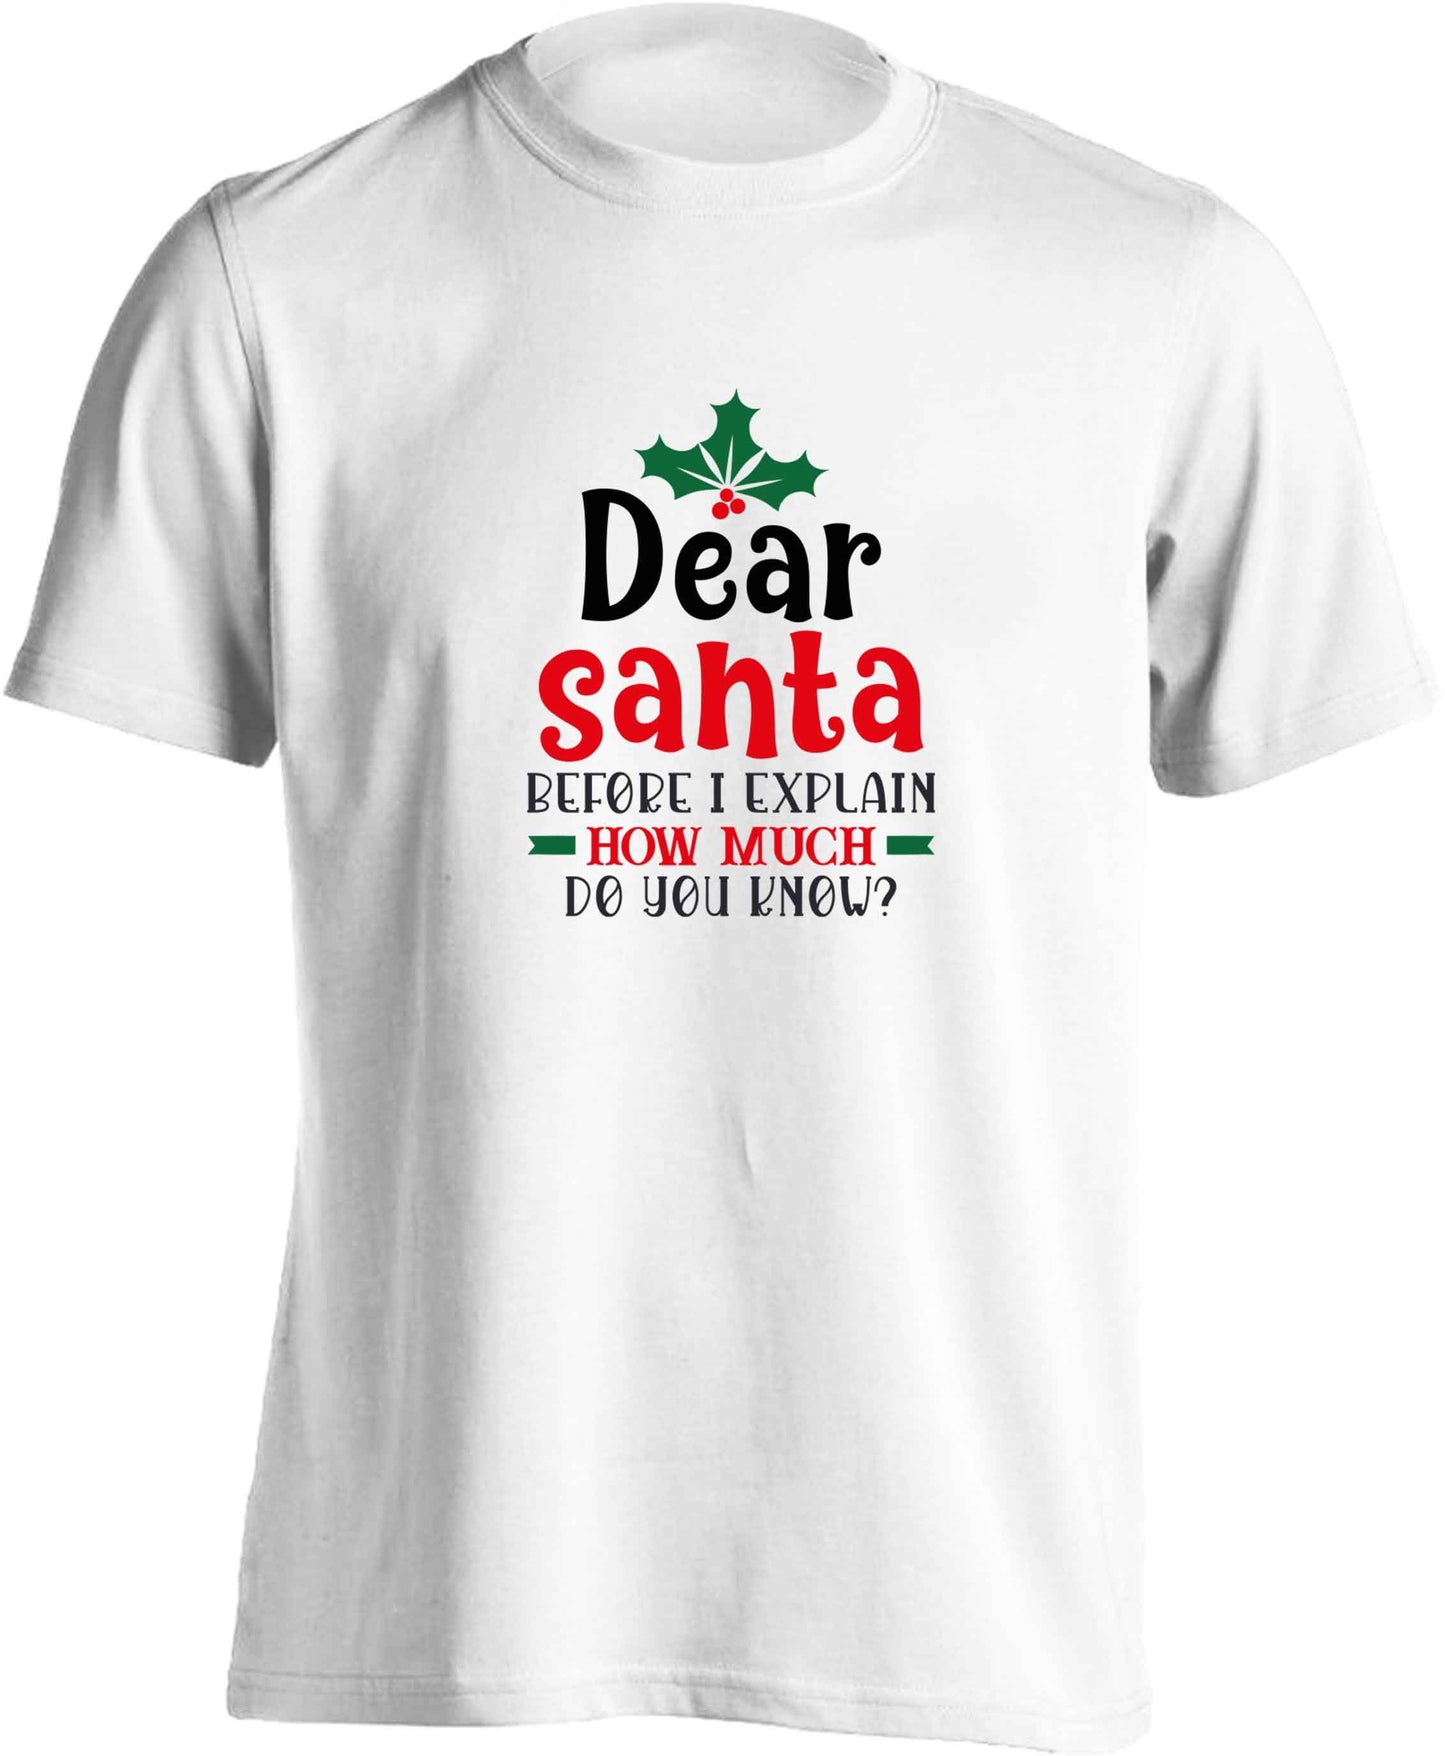 Santa before I explain how much do you know? adults unisex white Tshirt 2XL